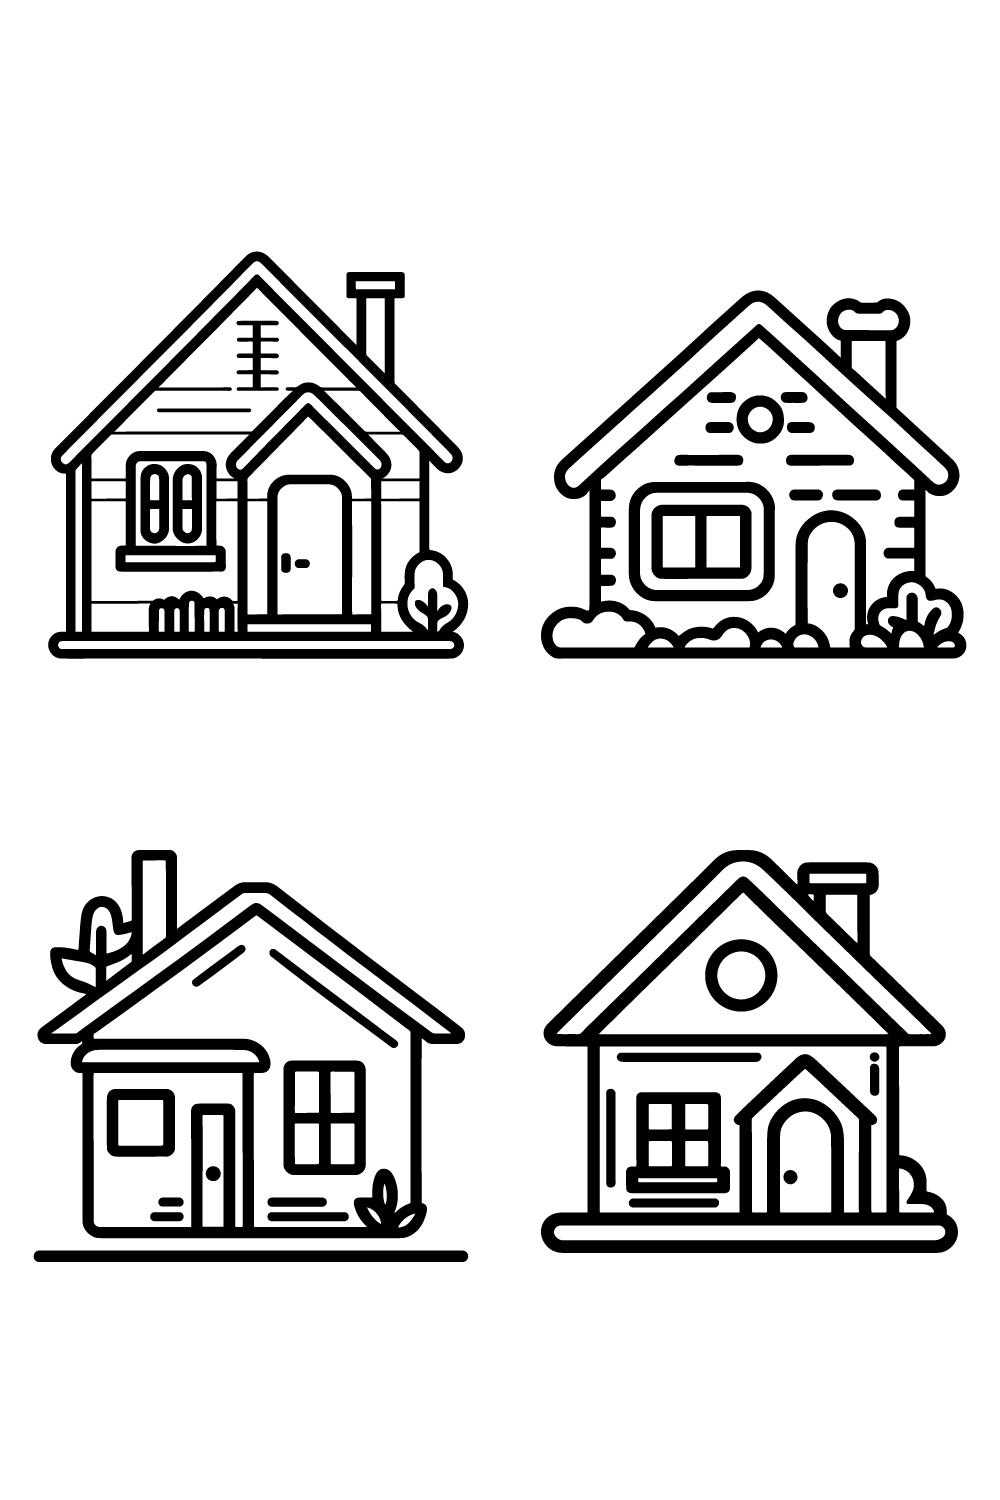 Home Icon set, Illustration of house icons, Black and white house icons, Outline Style, Home line art icons, and clean simple design pinterest preview image.